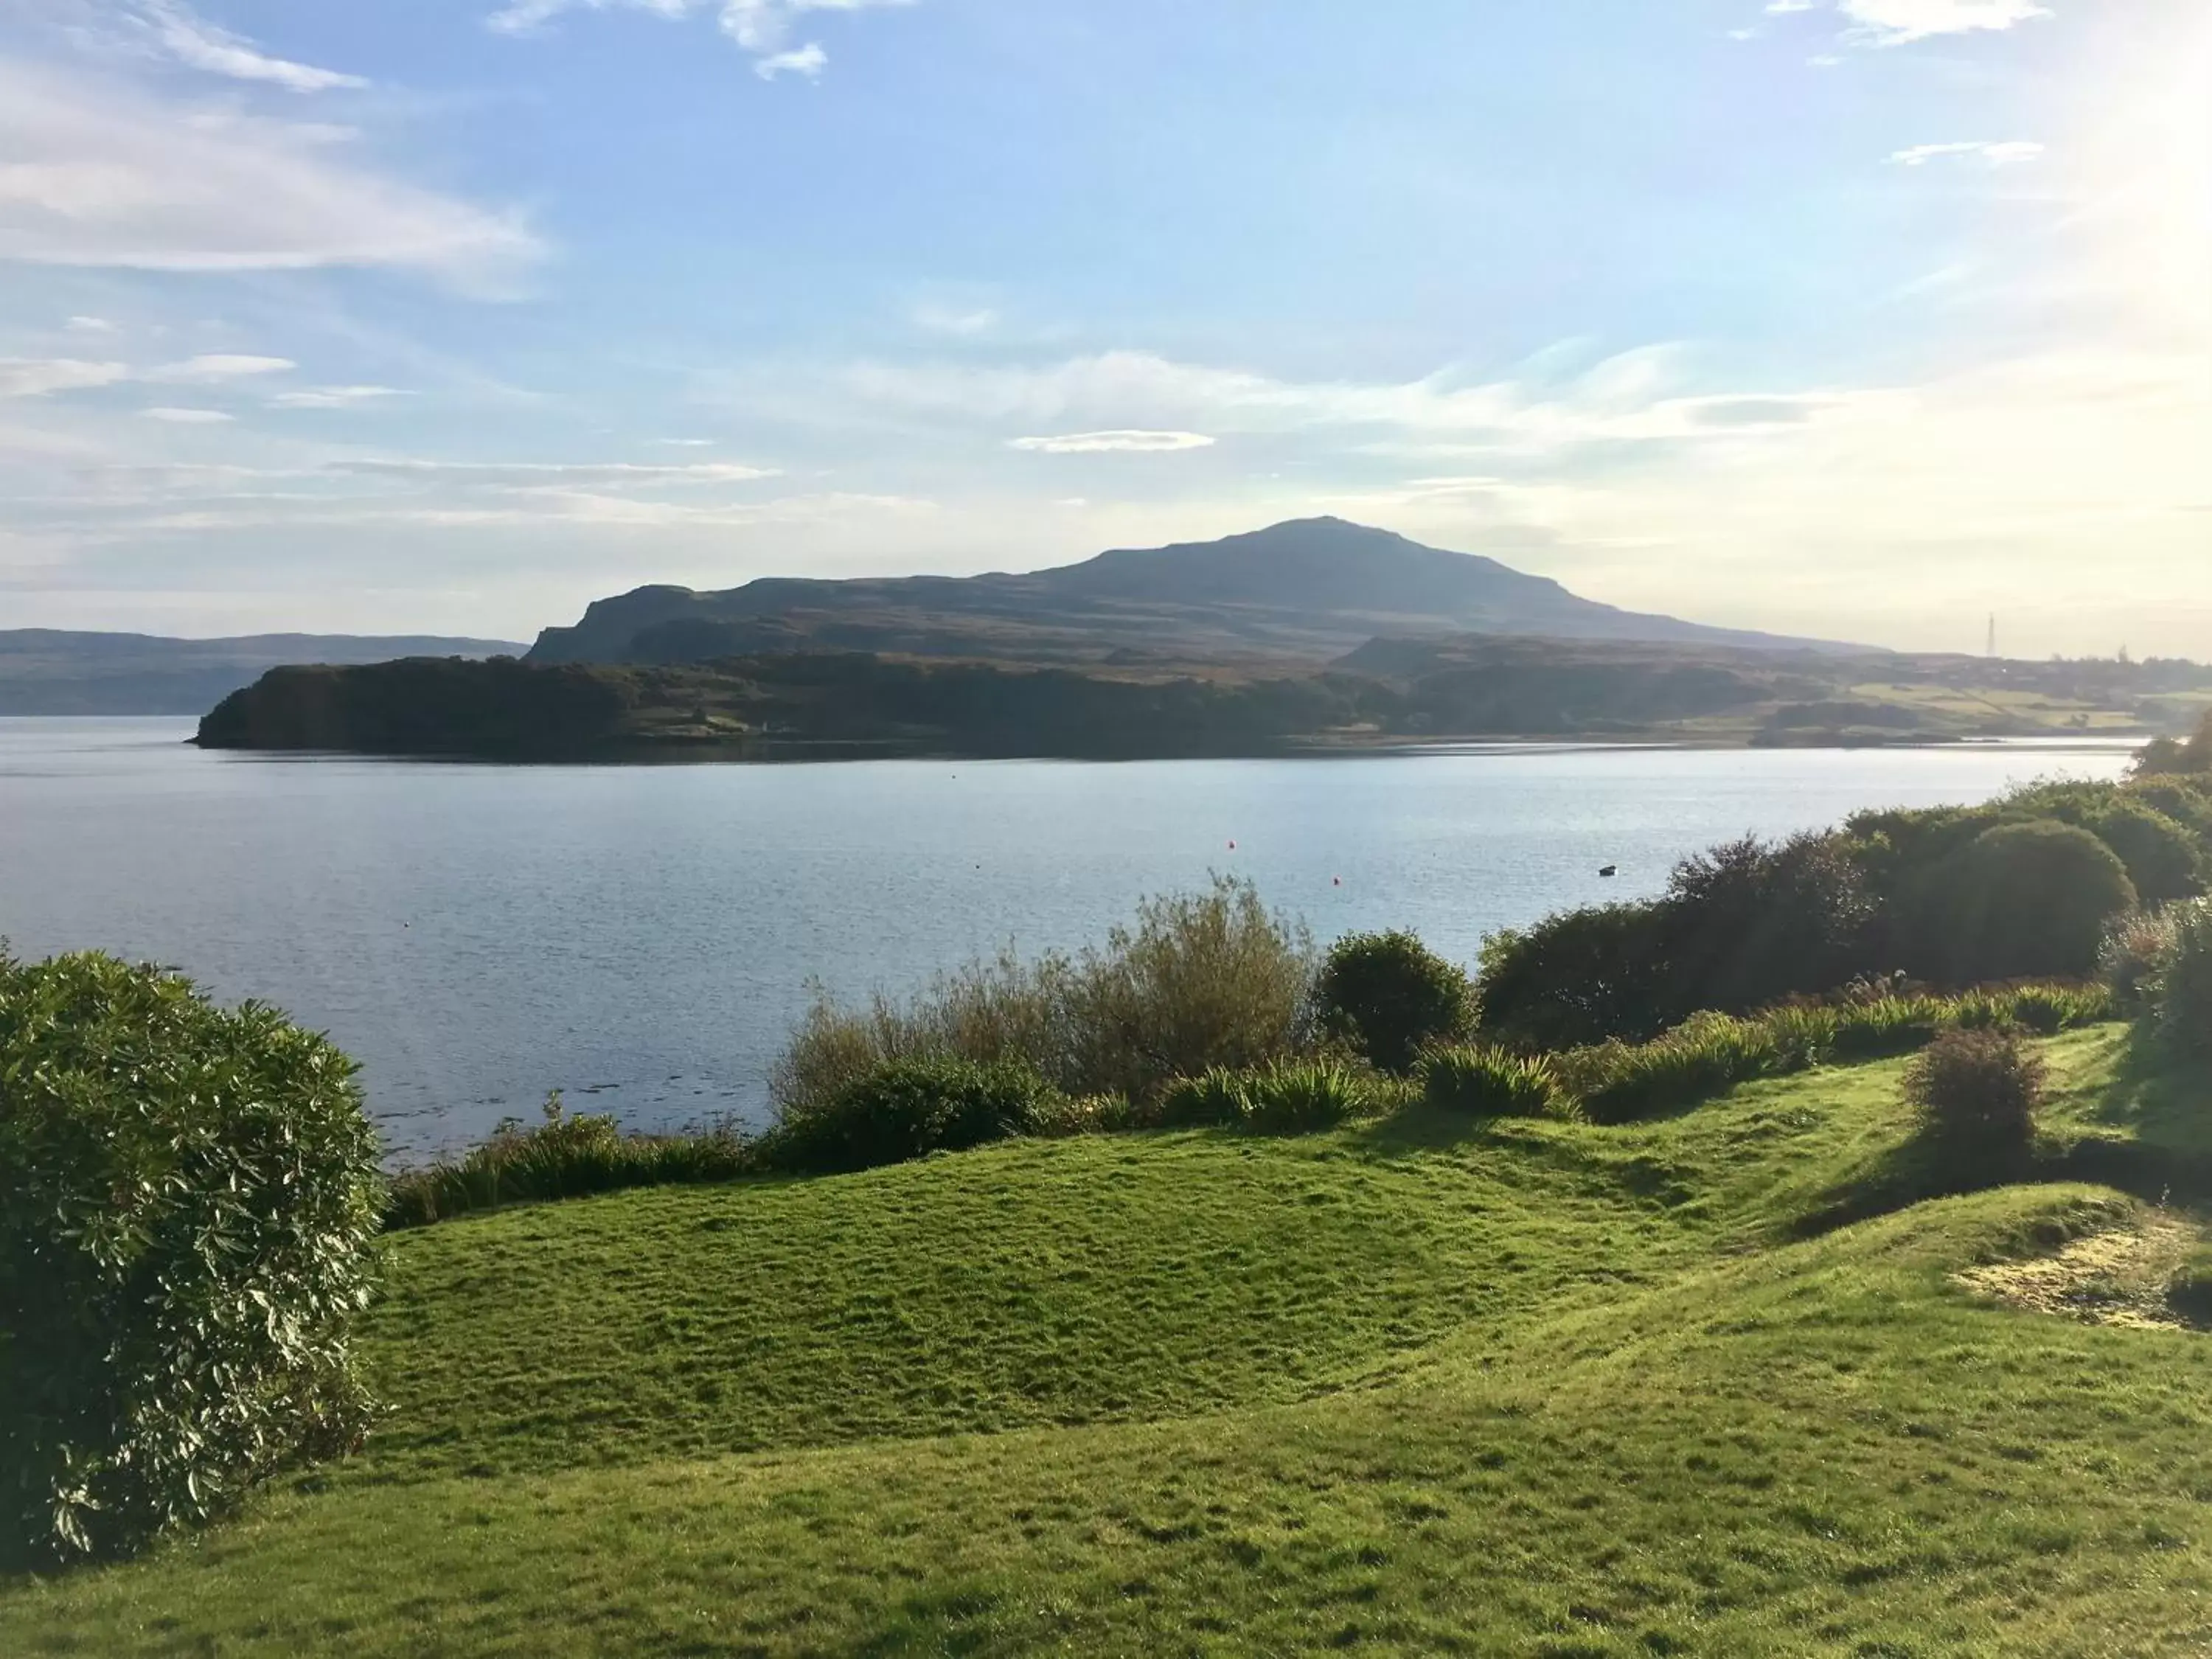 Property building in An-Airidh Bed & Breakfast Portree